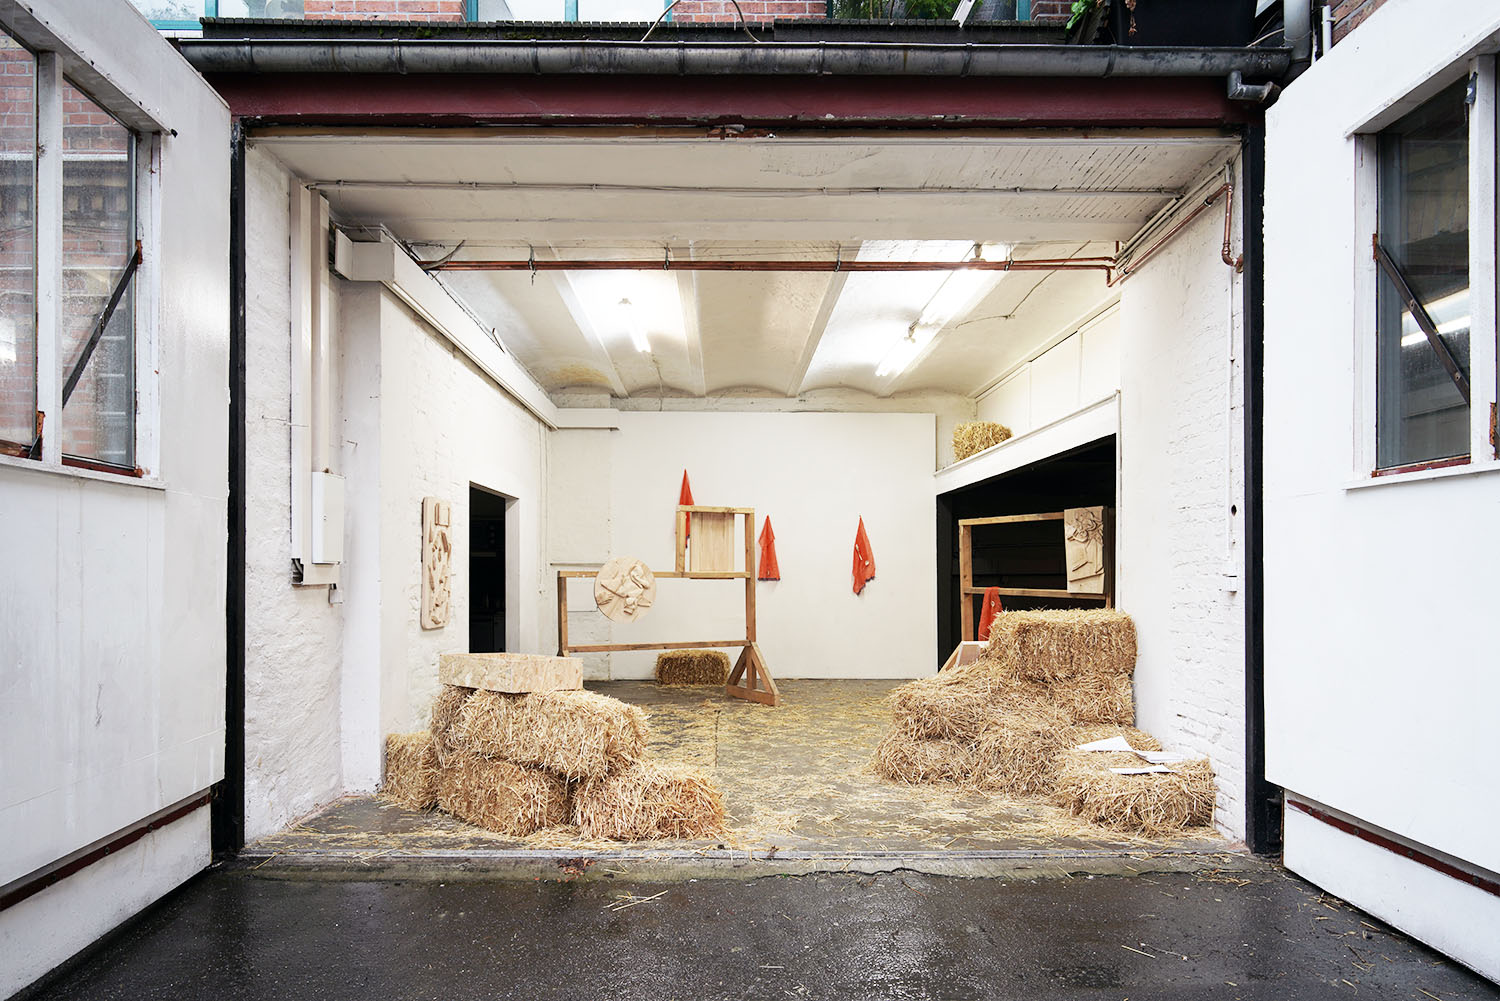 The Photo shows an installation view of Herfurtner's solo exhibition 